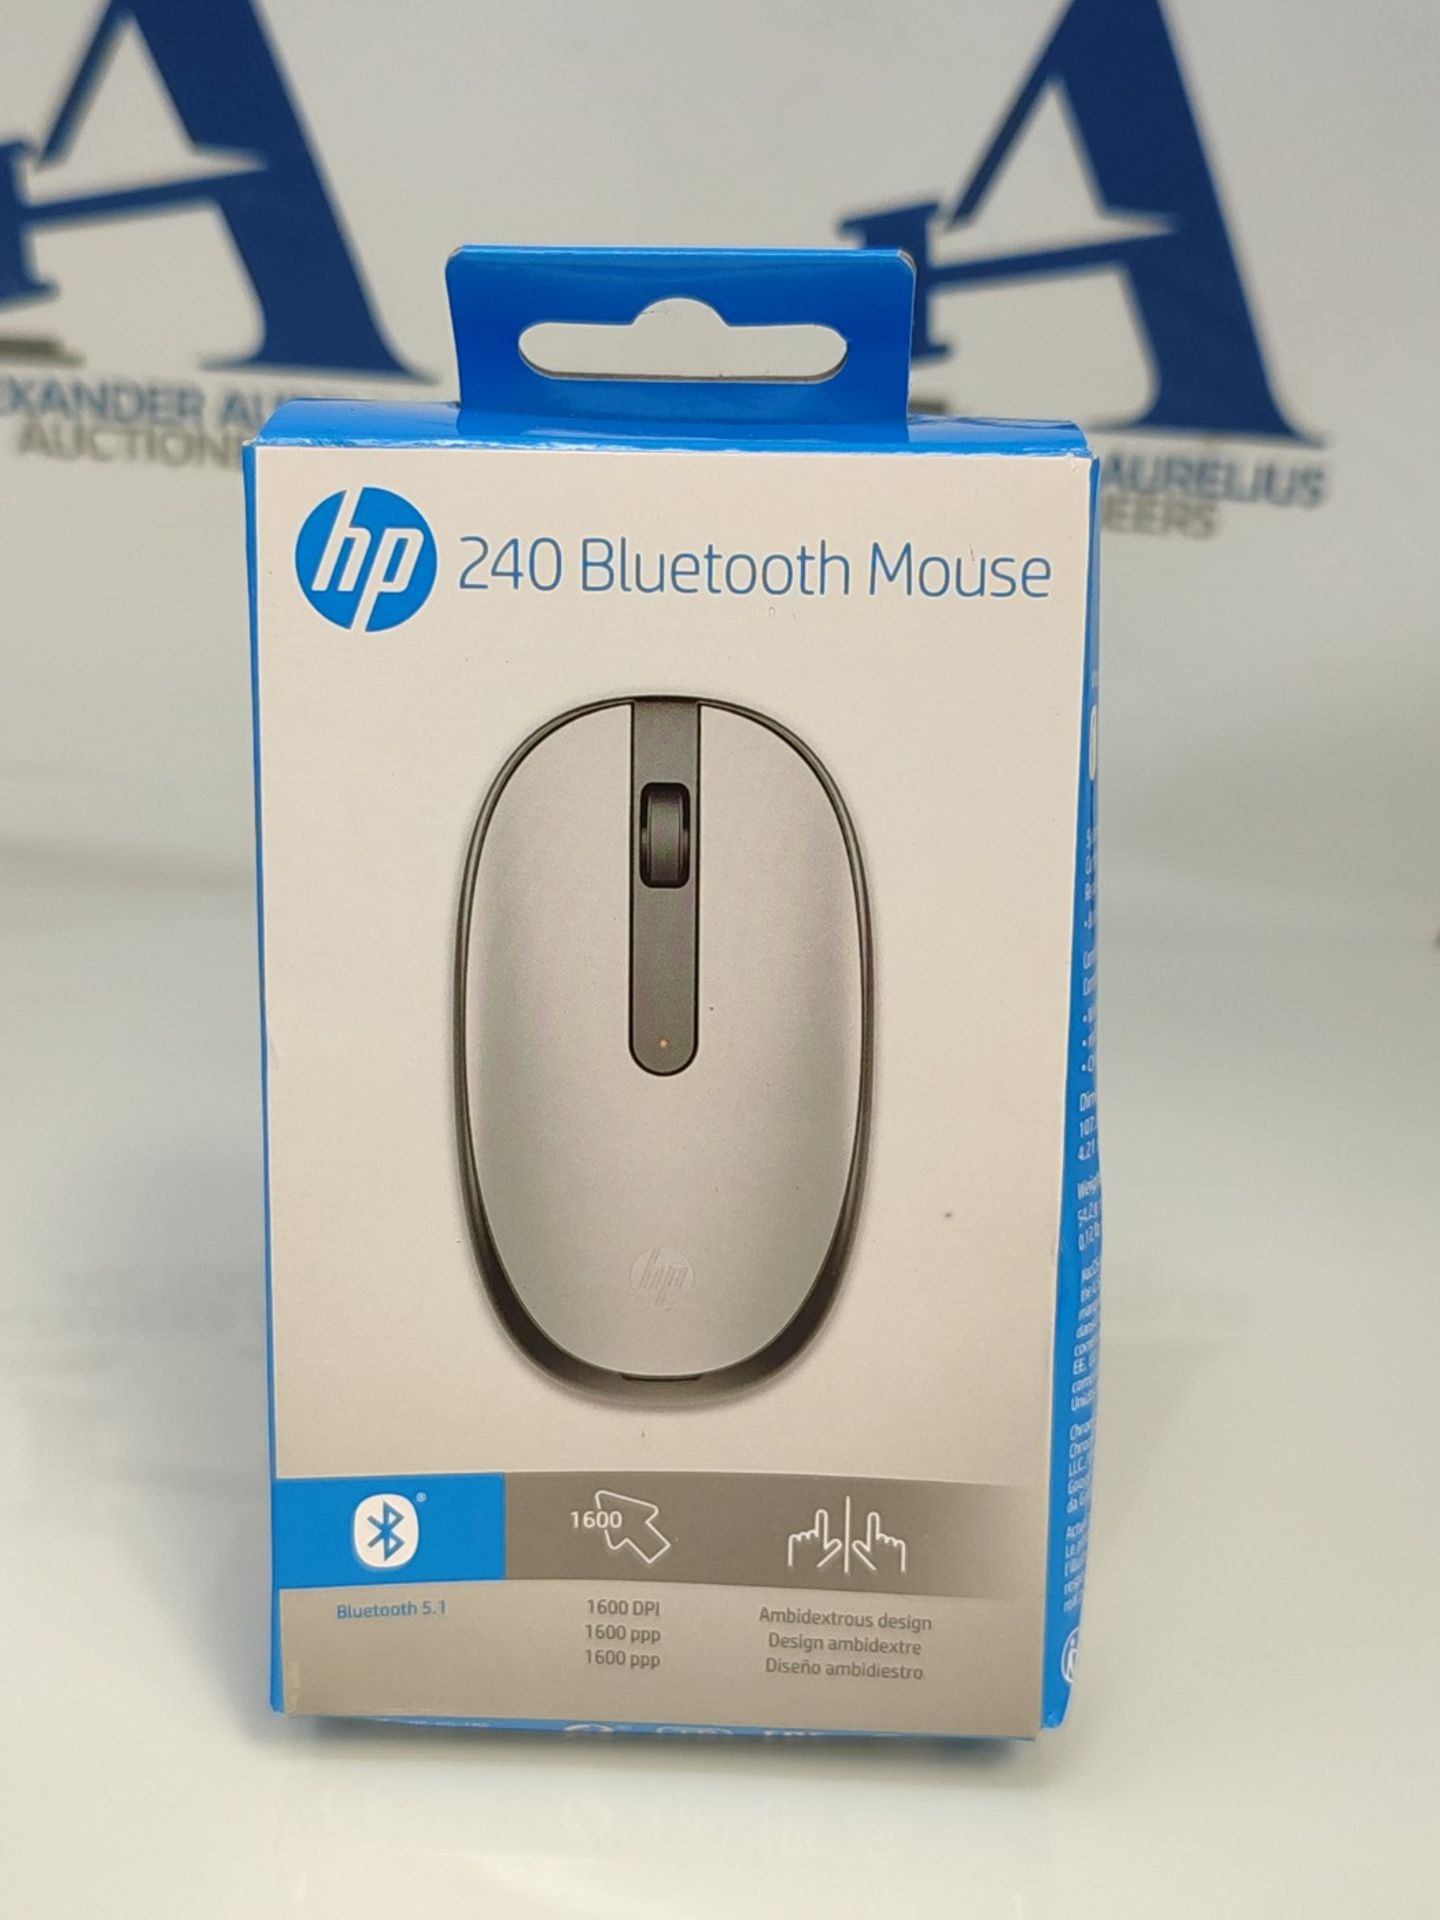 HP 240 Mouse Empire Wireless, 1600 DPI Optical Sensor, Bluetooth 5.1, 3 Buttons, Scrol - Image 2 of 3